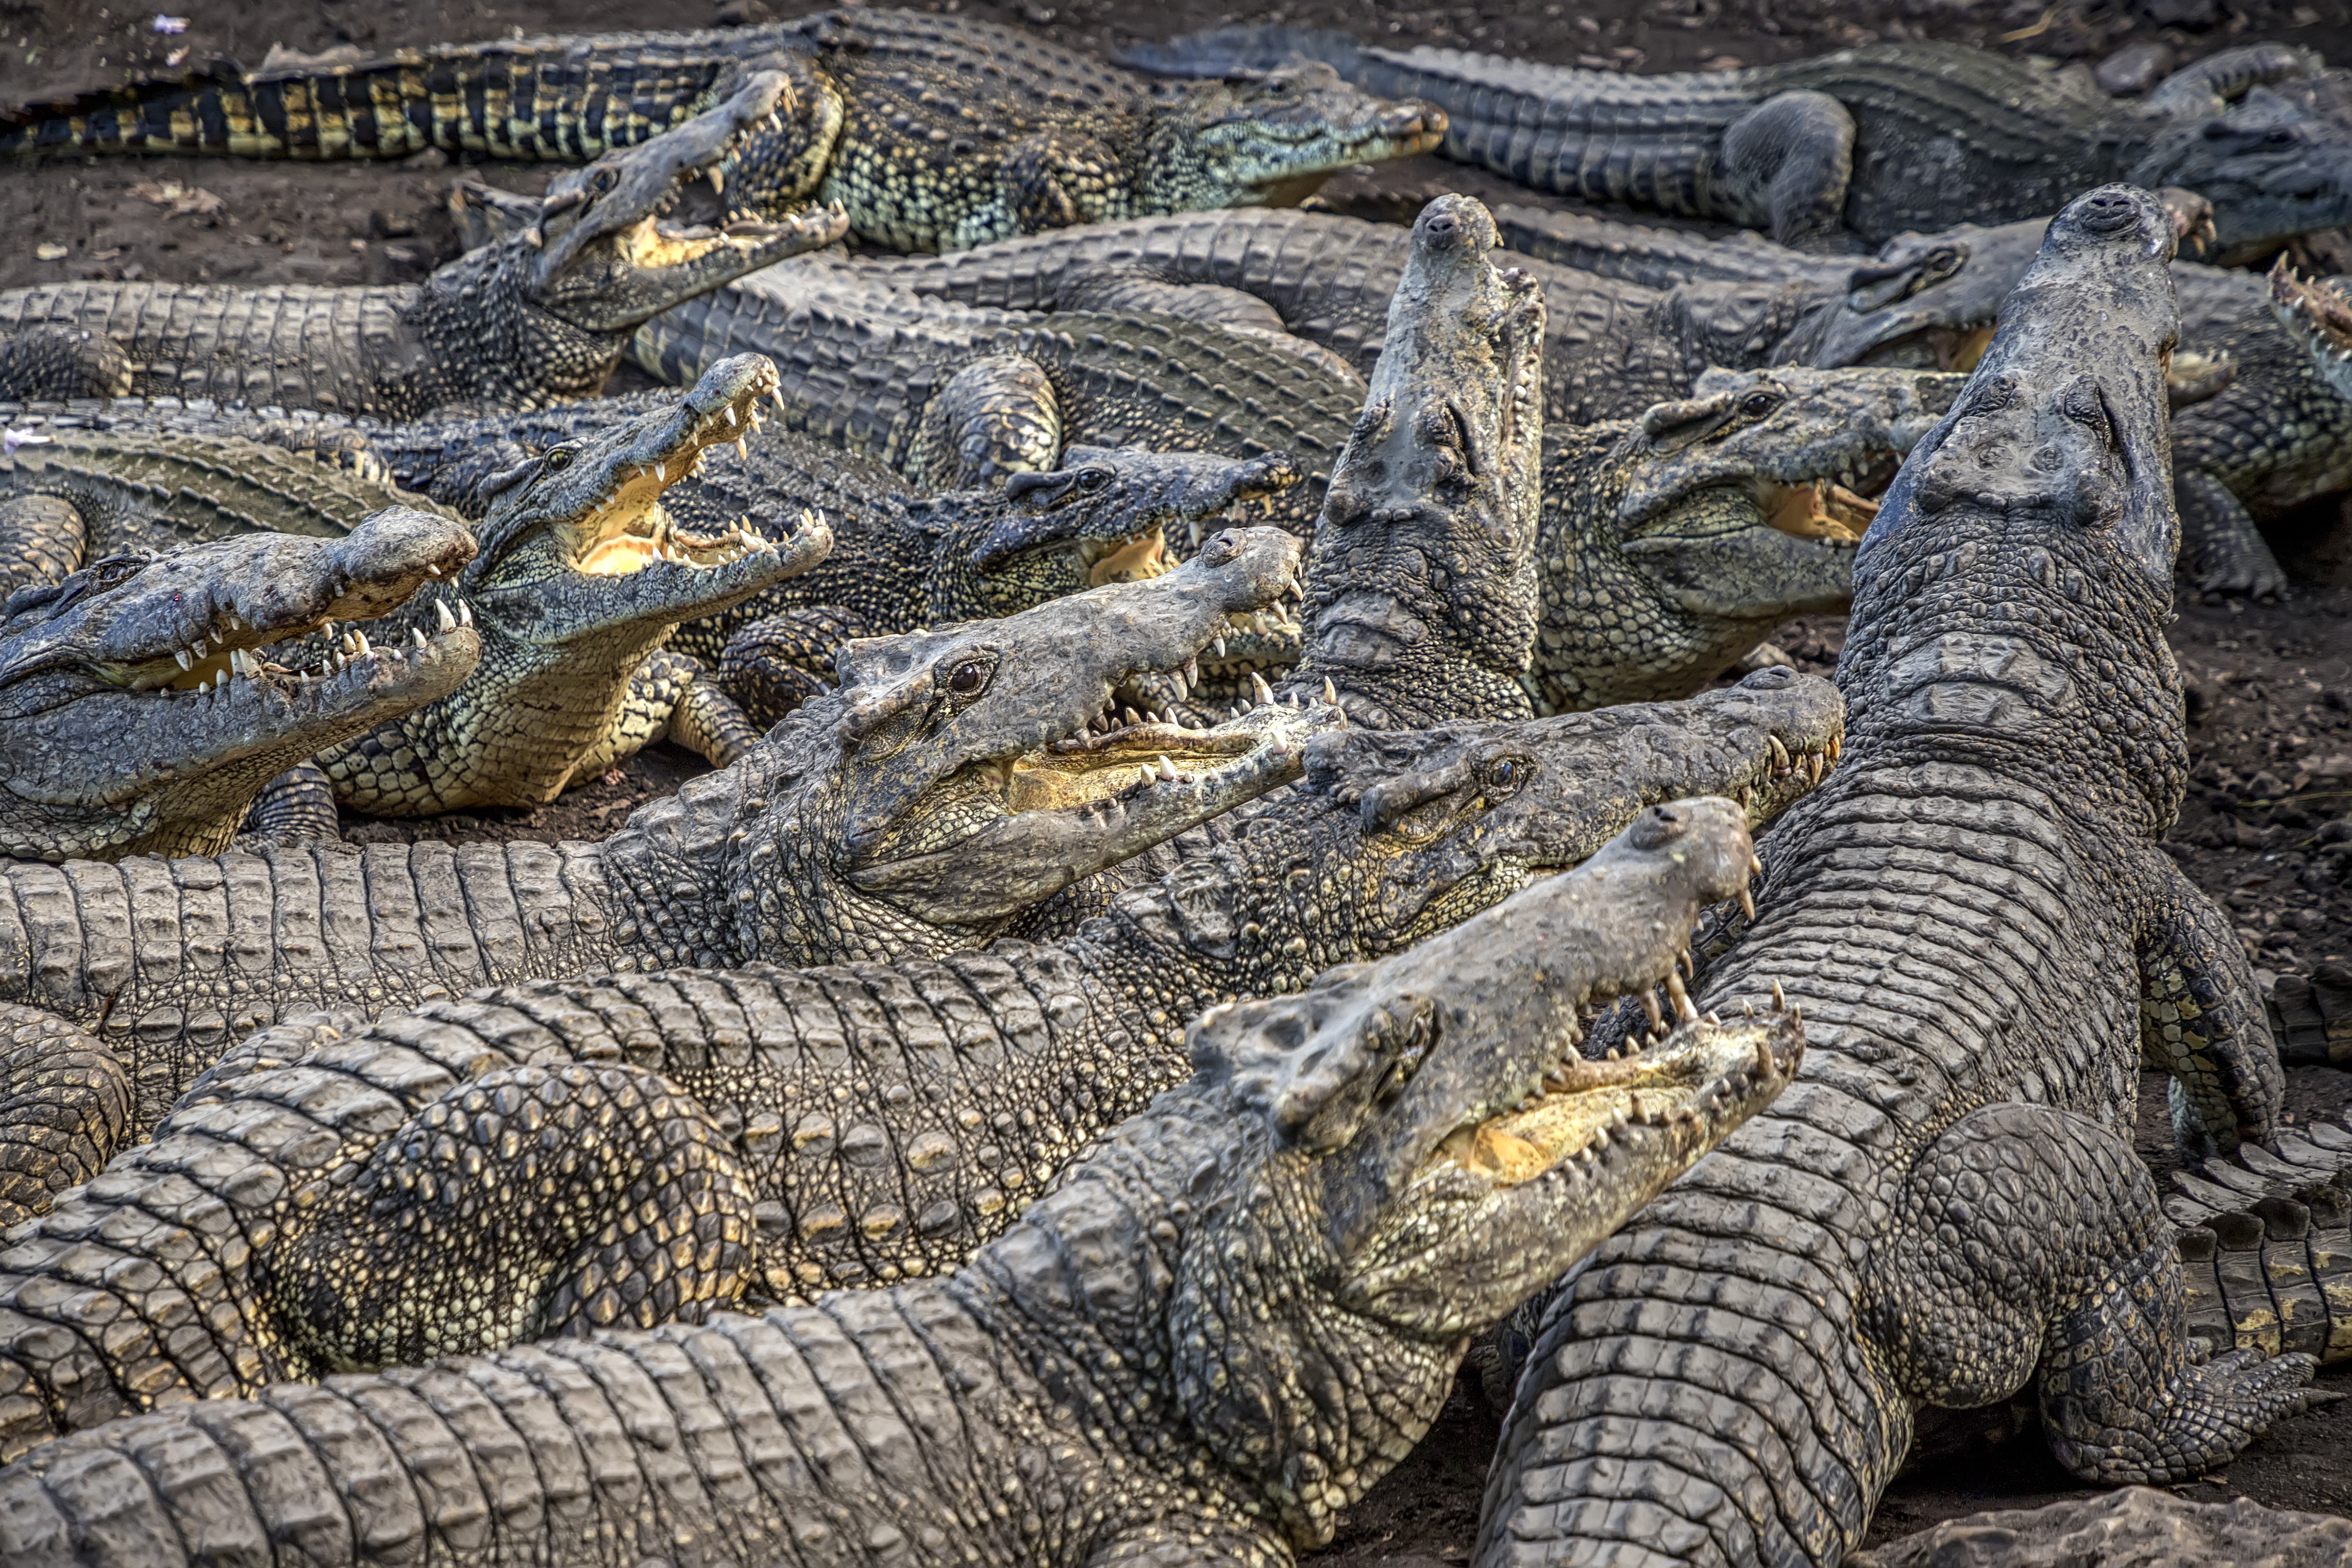 Why are fashion houses buying up crocodile farms? BBC News 